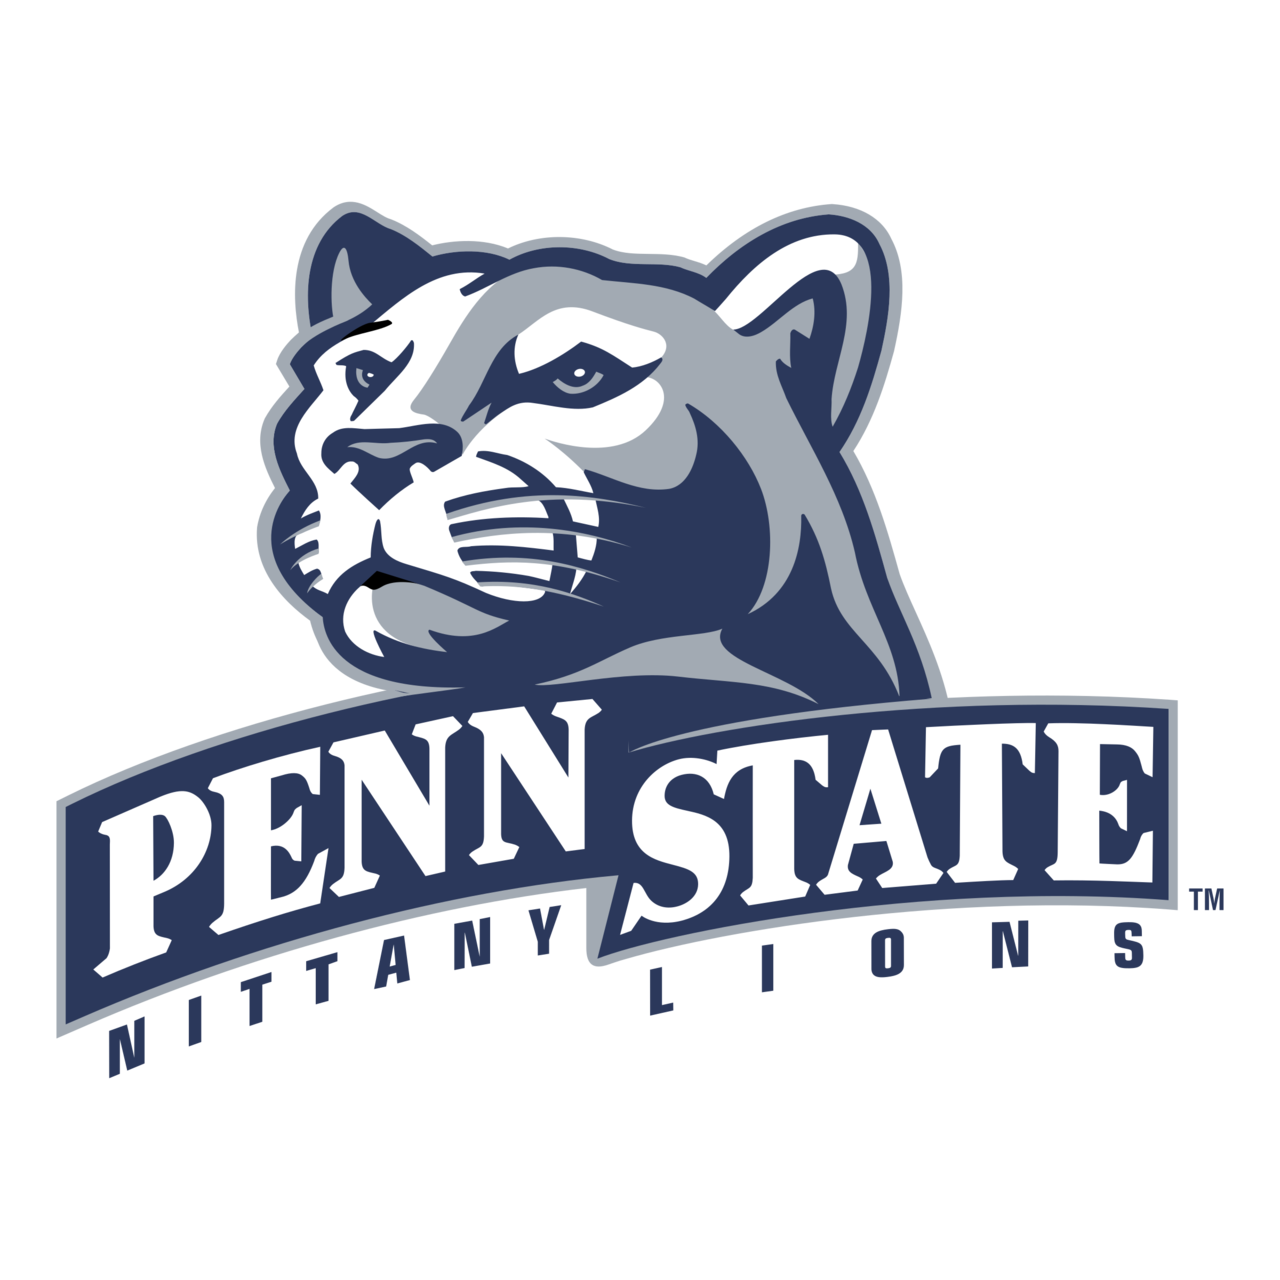 Download Penn State Lions Logo PNG and Vector (PDF, SVG, Ai, EPS) Free